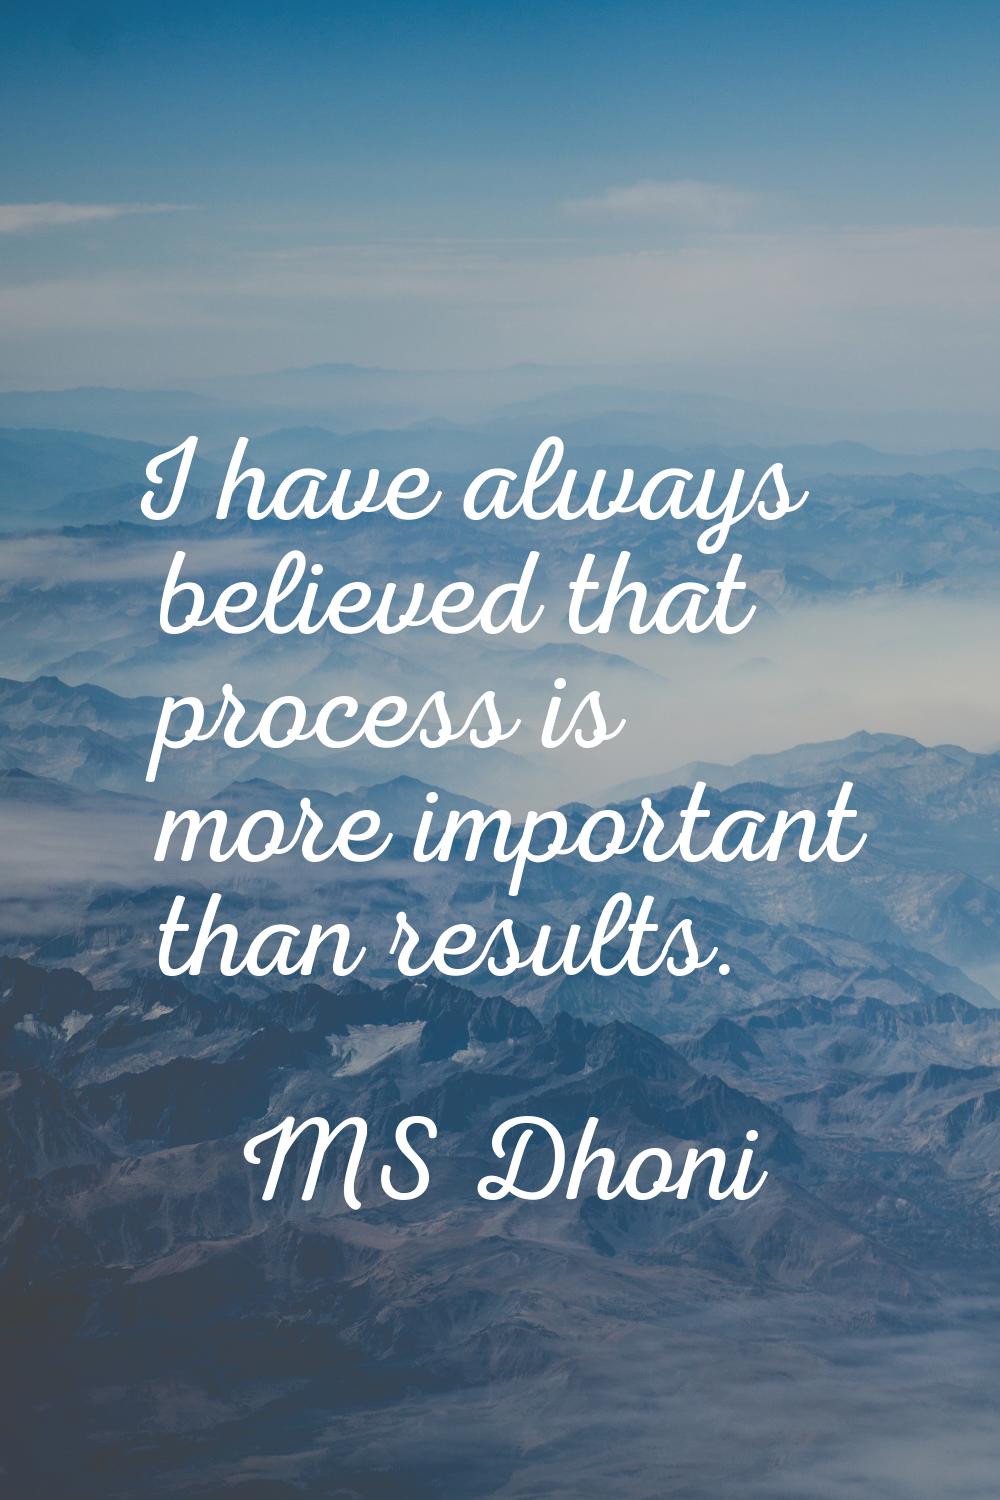 I have always believed that process is more important than results.